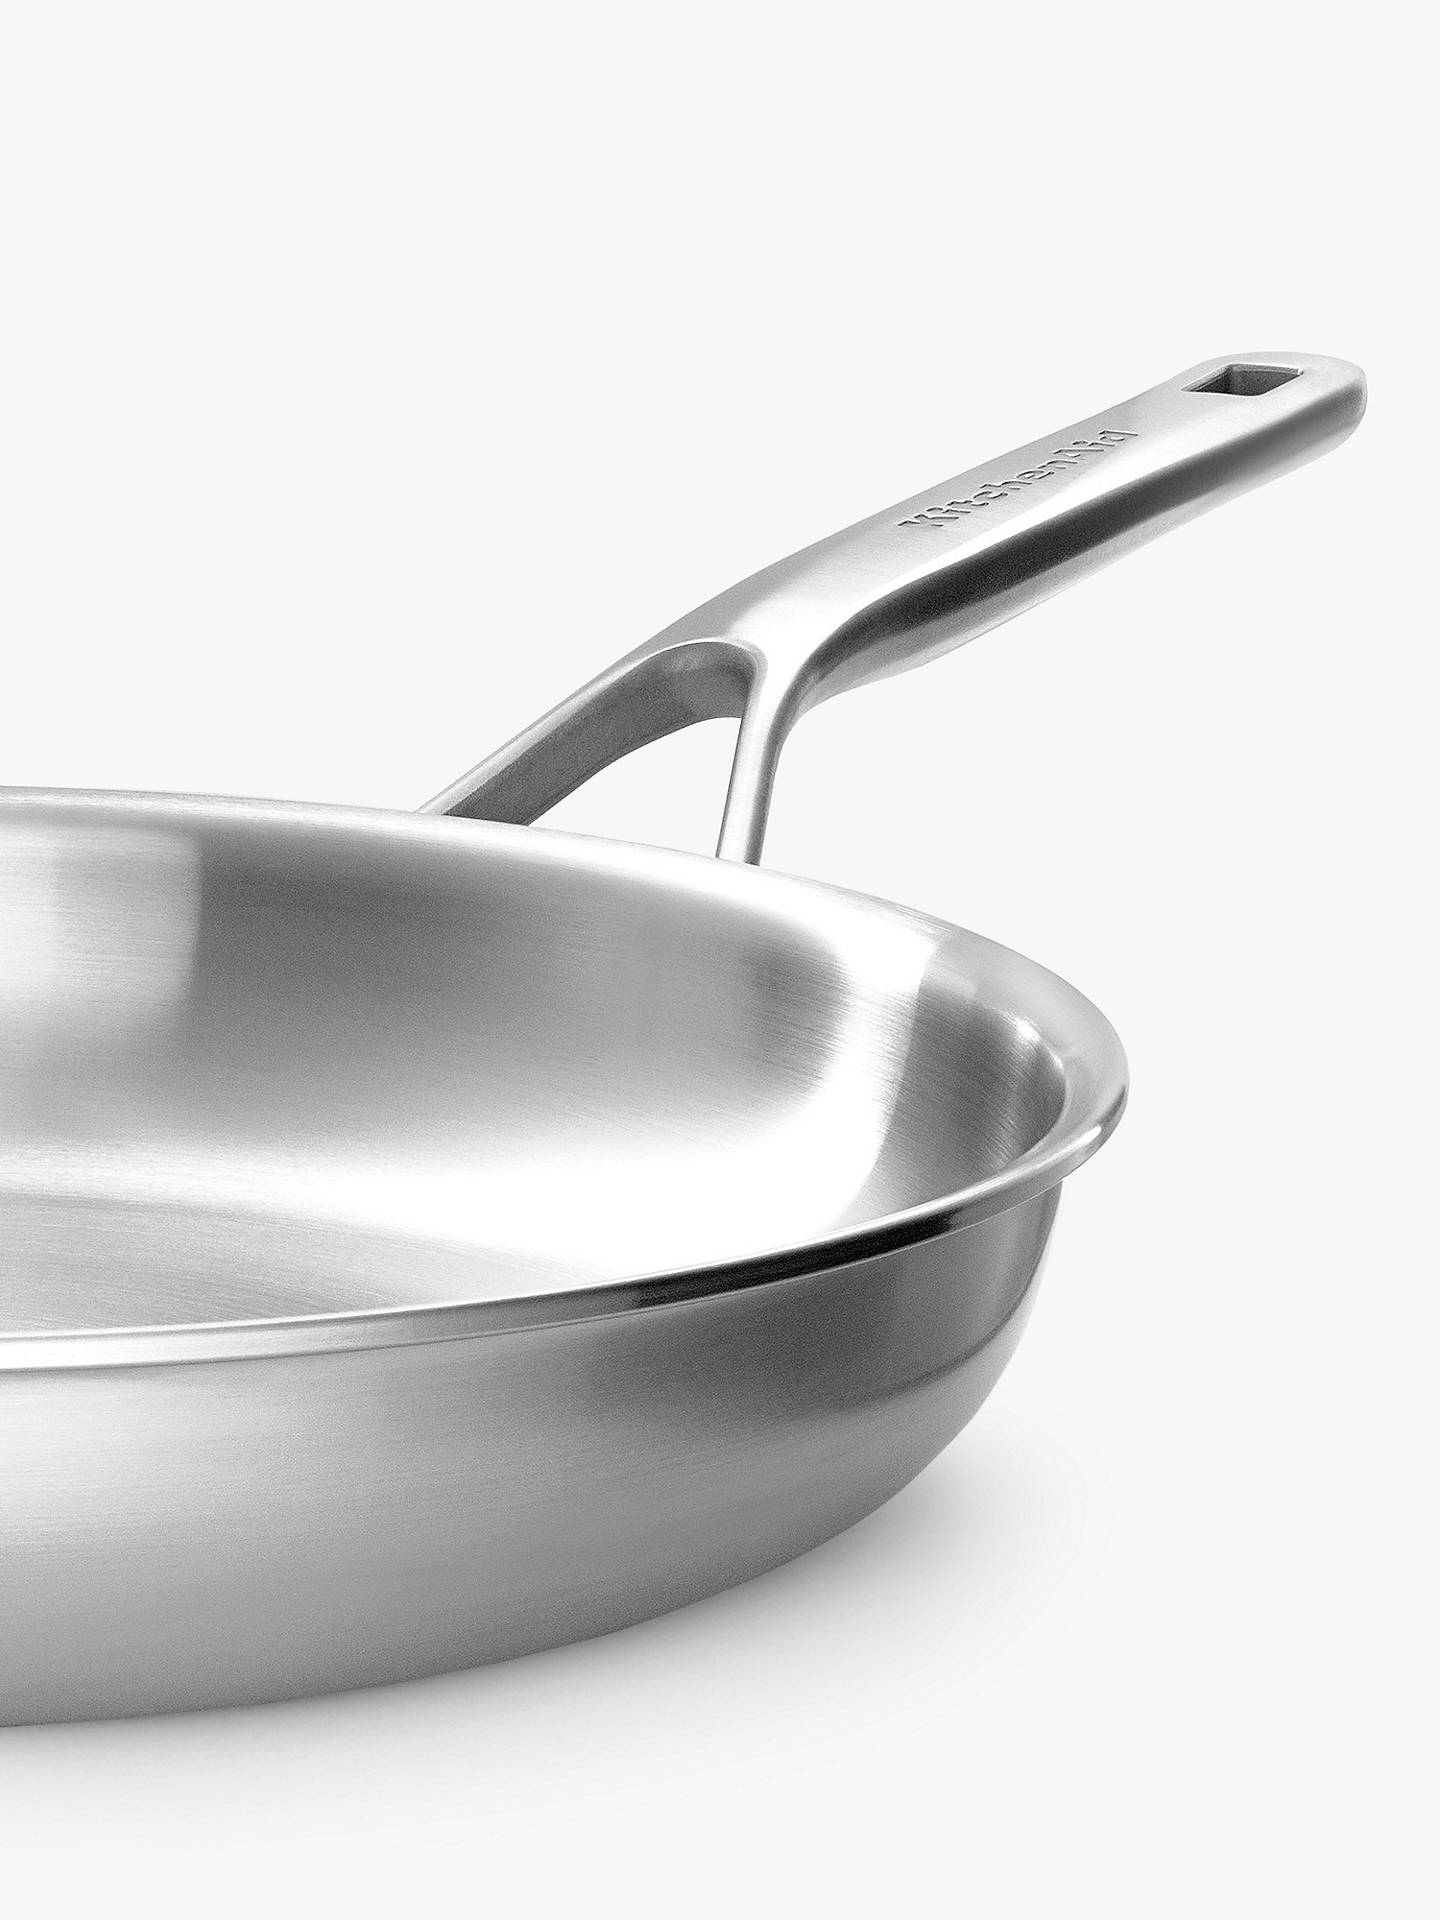 Uncoated Stainless Steel Frying Pan